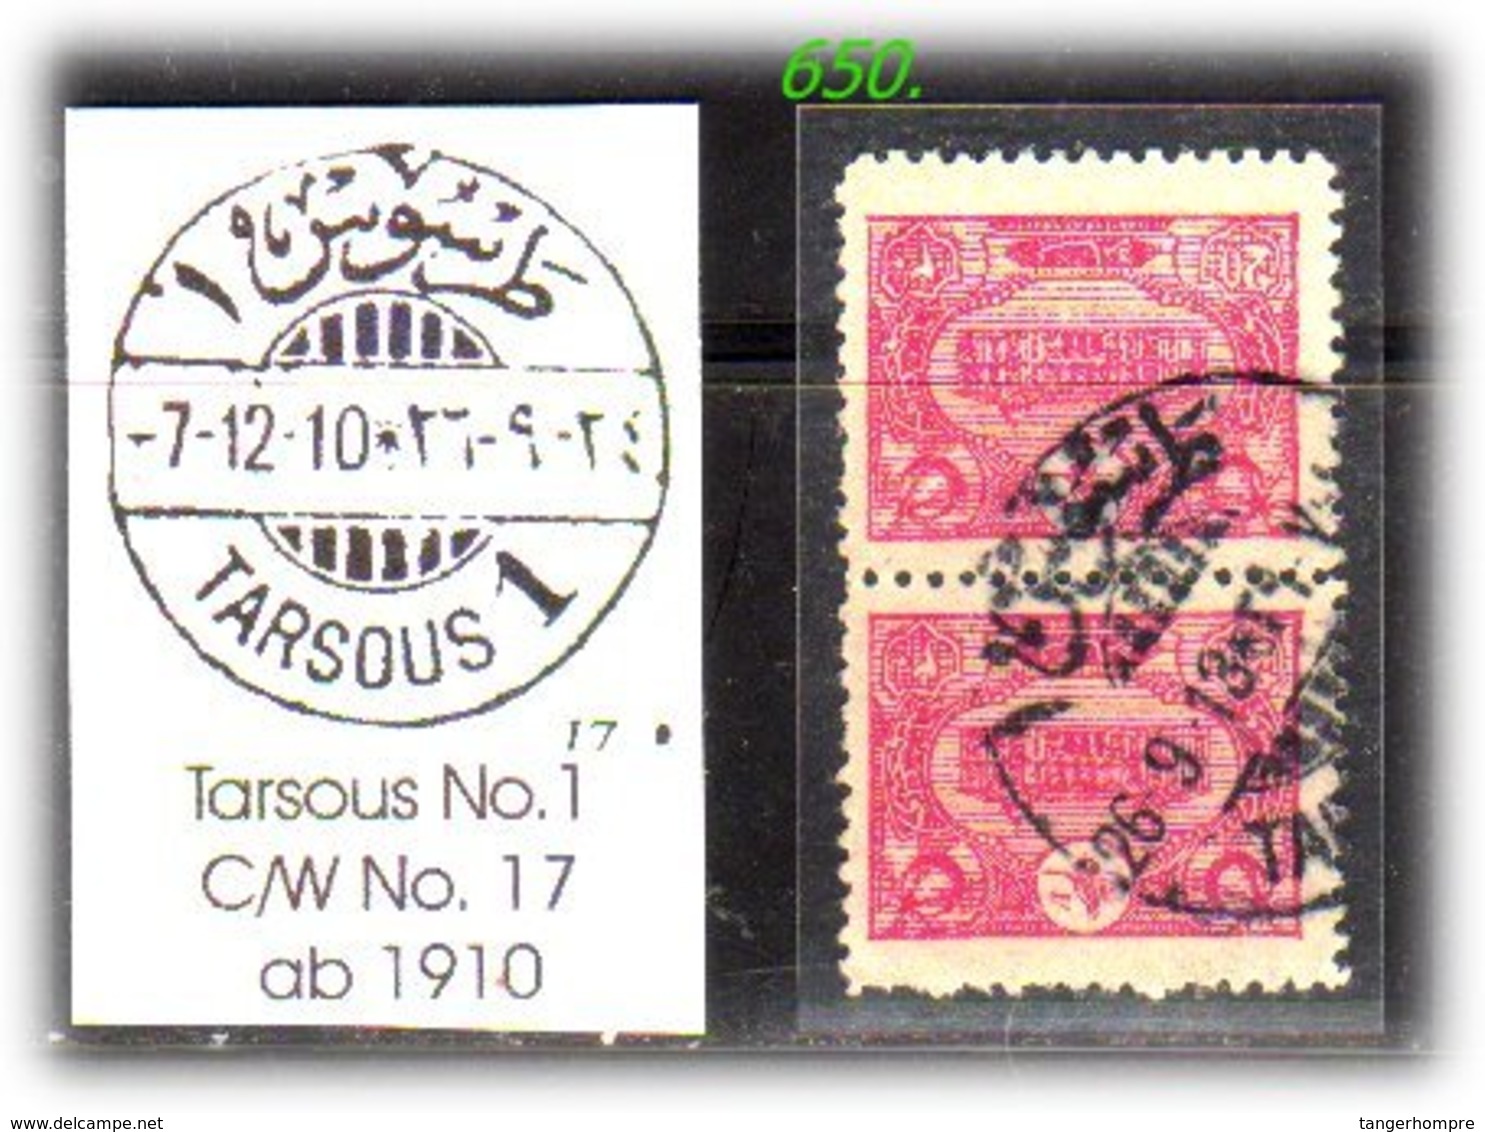 EARLY OTTOMAN SPECIALIZED FOR SPECIALIST, SEE....Stempel - TARSOUS - Gebraucht